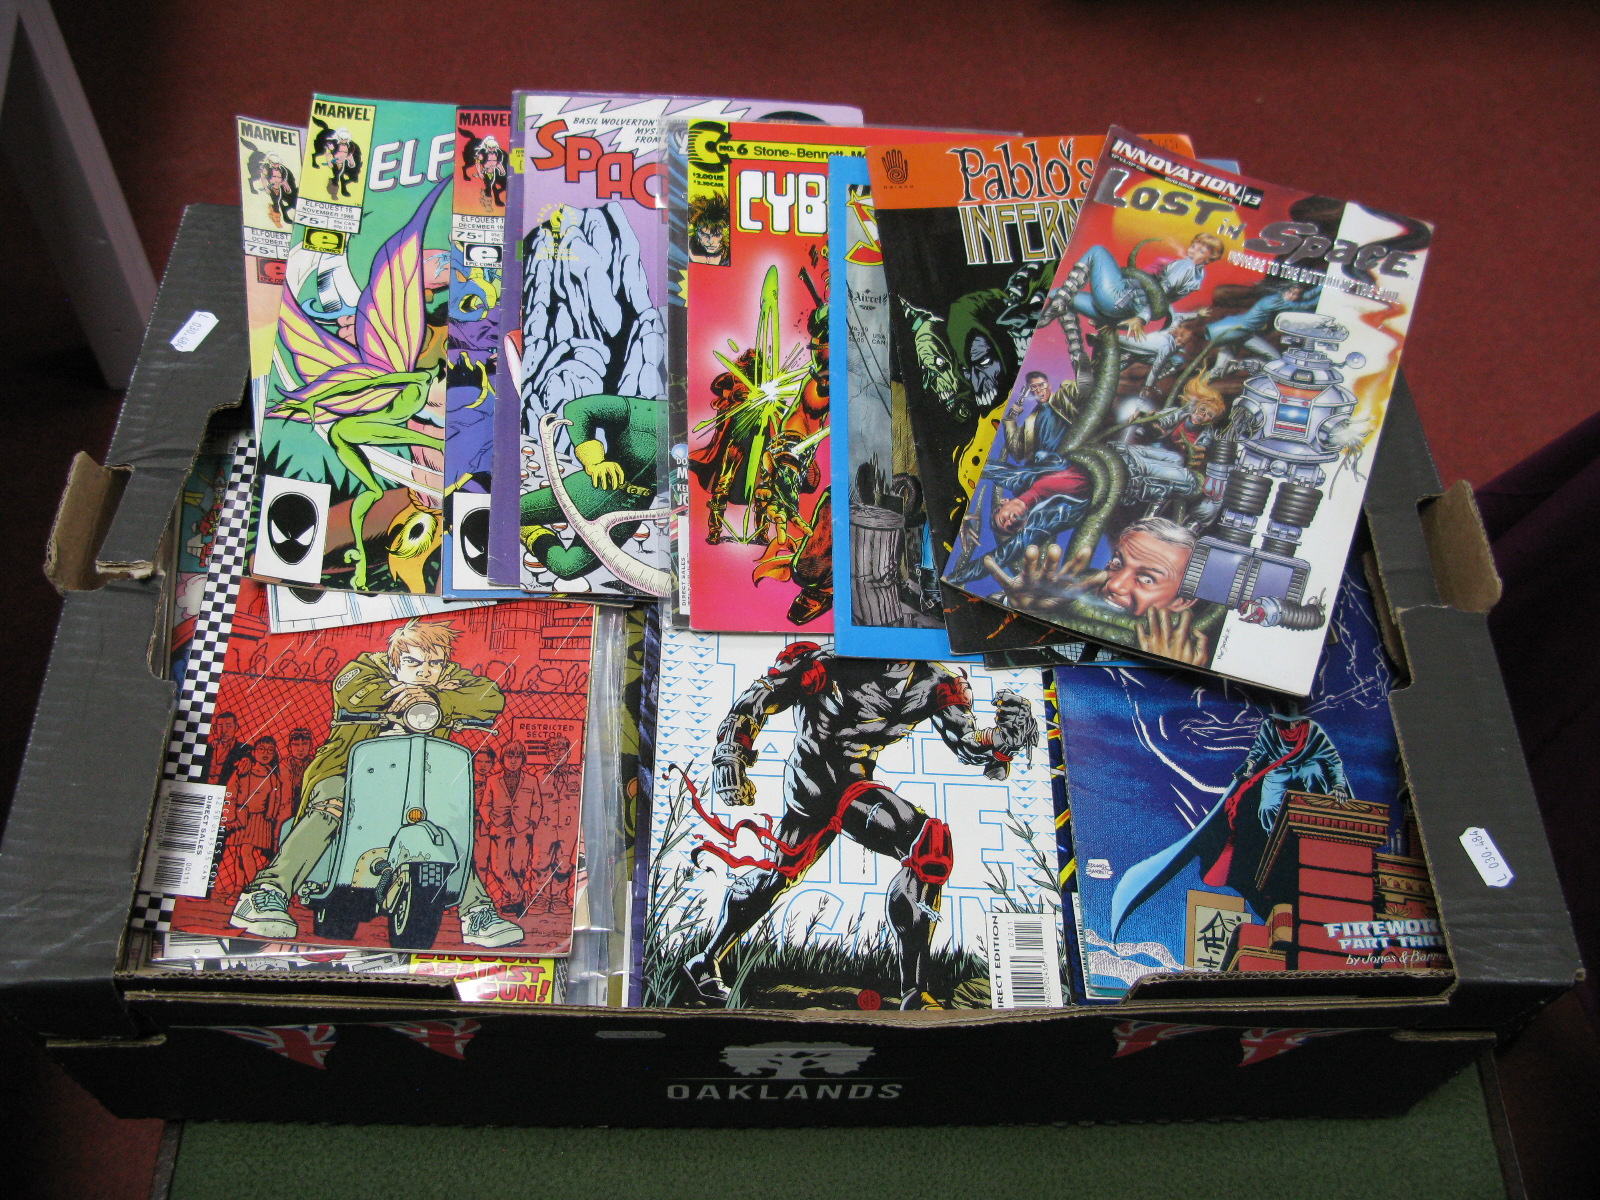 A Collection of Approximately Two Hundred Comics, by Wildstorm, DC, Marvel, Image, First Comics